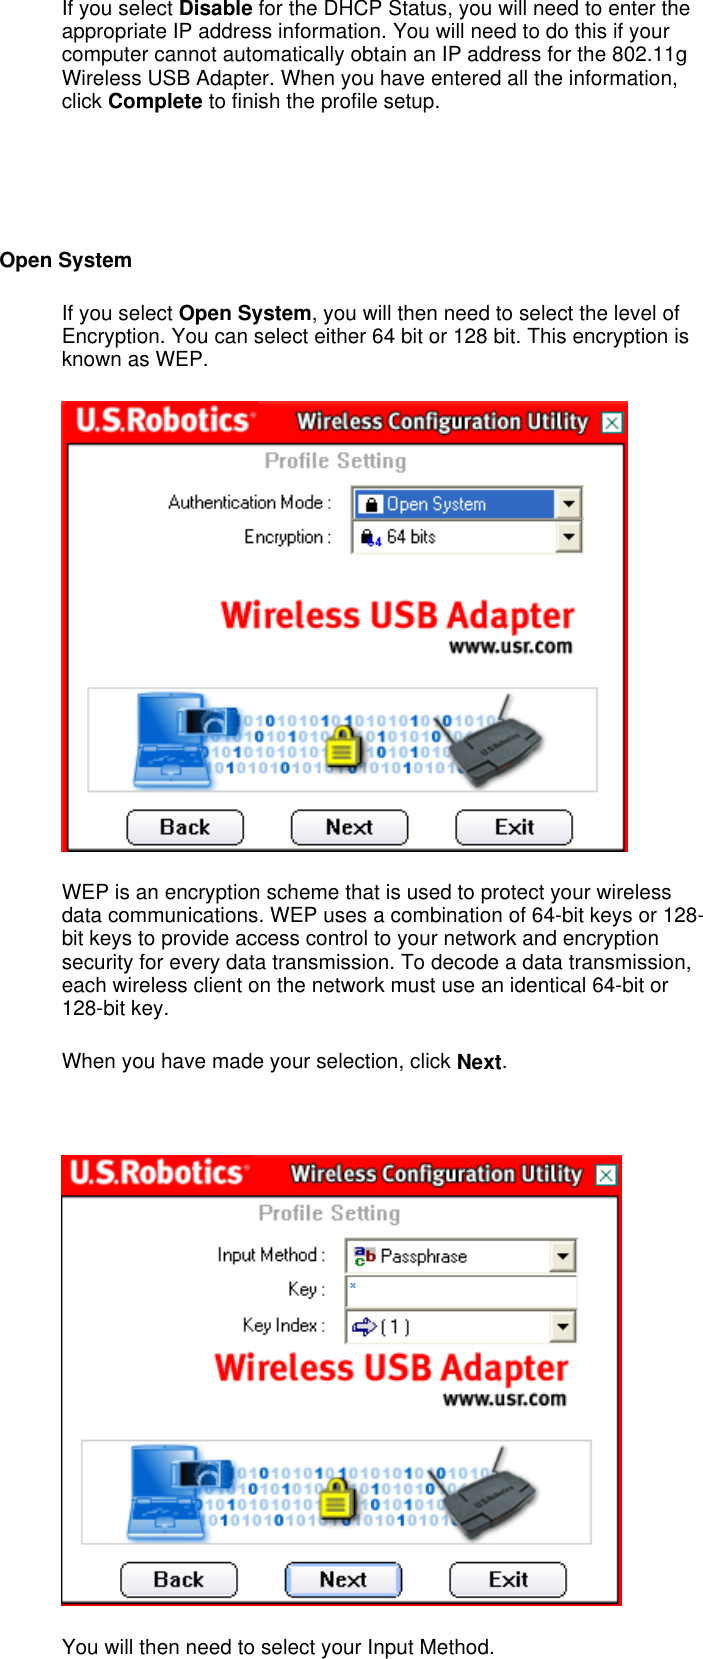 If you select Disable for the DHCP Status, you will need to enter the appropriate IP address information. You will need to do this if your computer cannot automatically obtain an IP address for the 802.11g Wireless USB Adapter. When you have entered all the information, click Complete to finish the profile setup.     Open System If you select Open System, you will then need to select the level of Encryption. You can select either 64 bit or 128 bit. This encryption is known as WEP.  WEP is an encryption scheme that is used to protect your wireless data communications. WEP uses a combination of 64-bit keys or 128-bit keys to provide access control to your network and encryption security for every data transmission. To decode a data transmission, each wireless client on the network must use an identical 64-bit or 128-bit key. When you have made your selection, click Next.    You will then need to select your Input Method. 